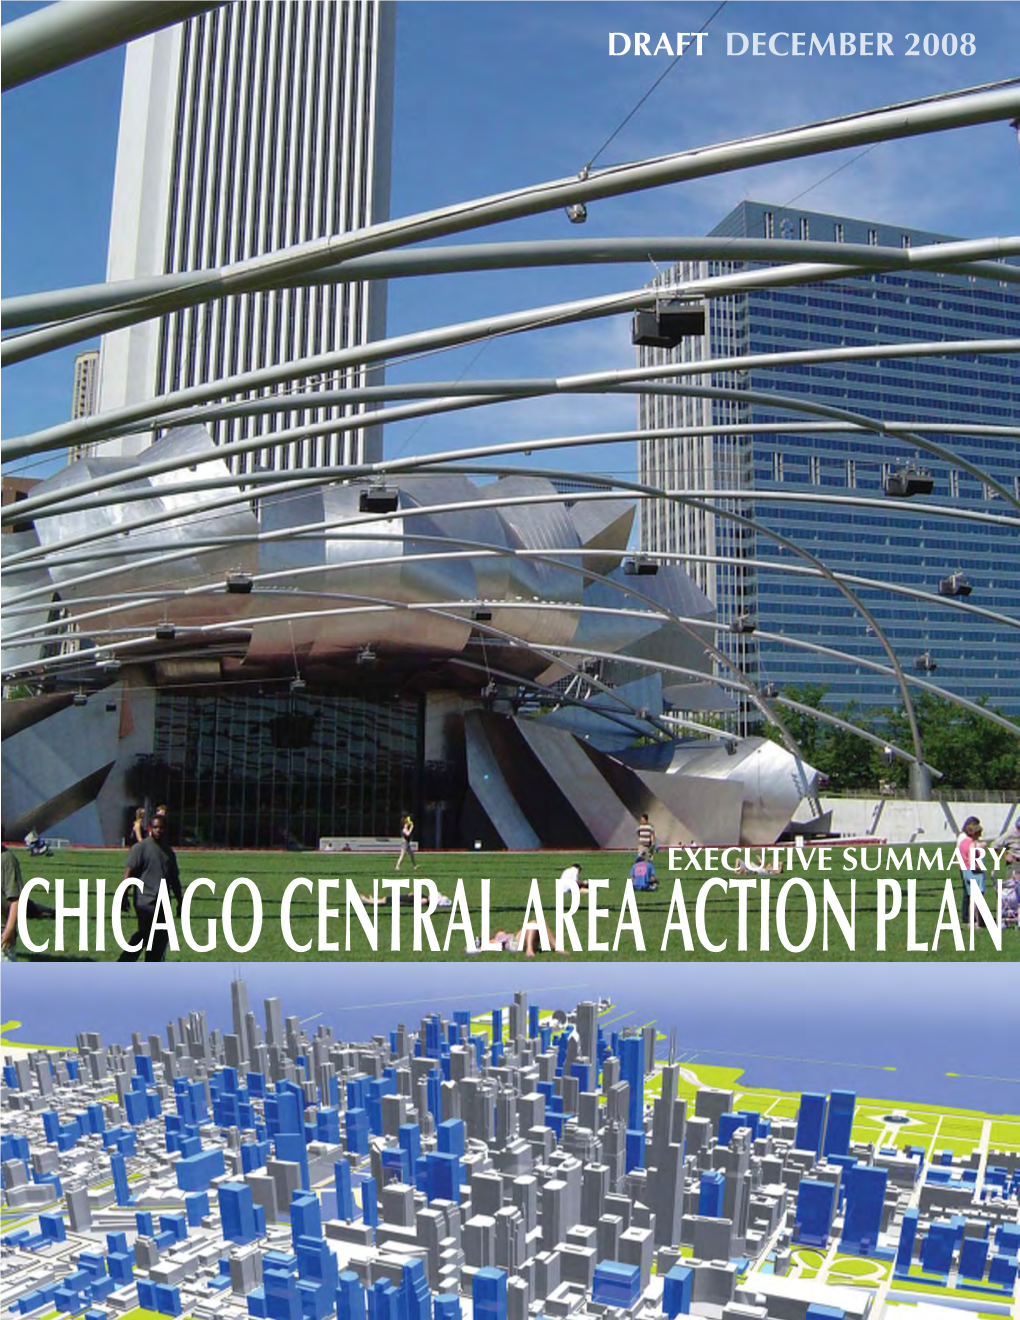 Chicago Central Area Action Plan Message from the Mayor